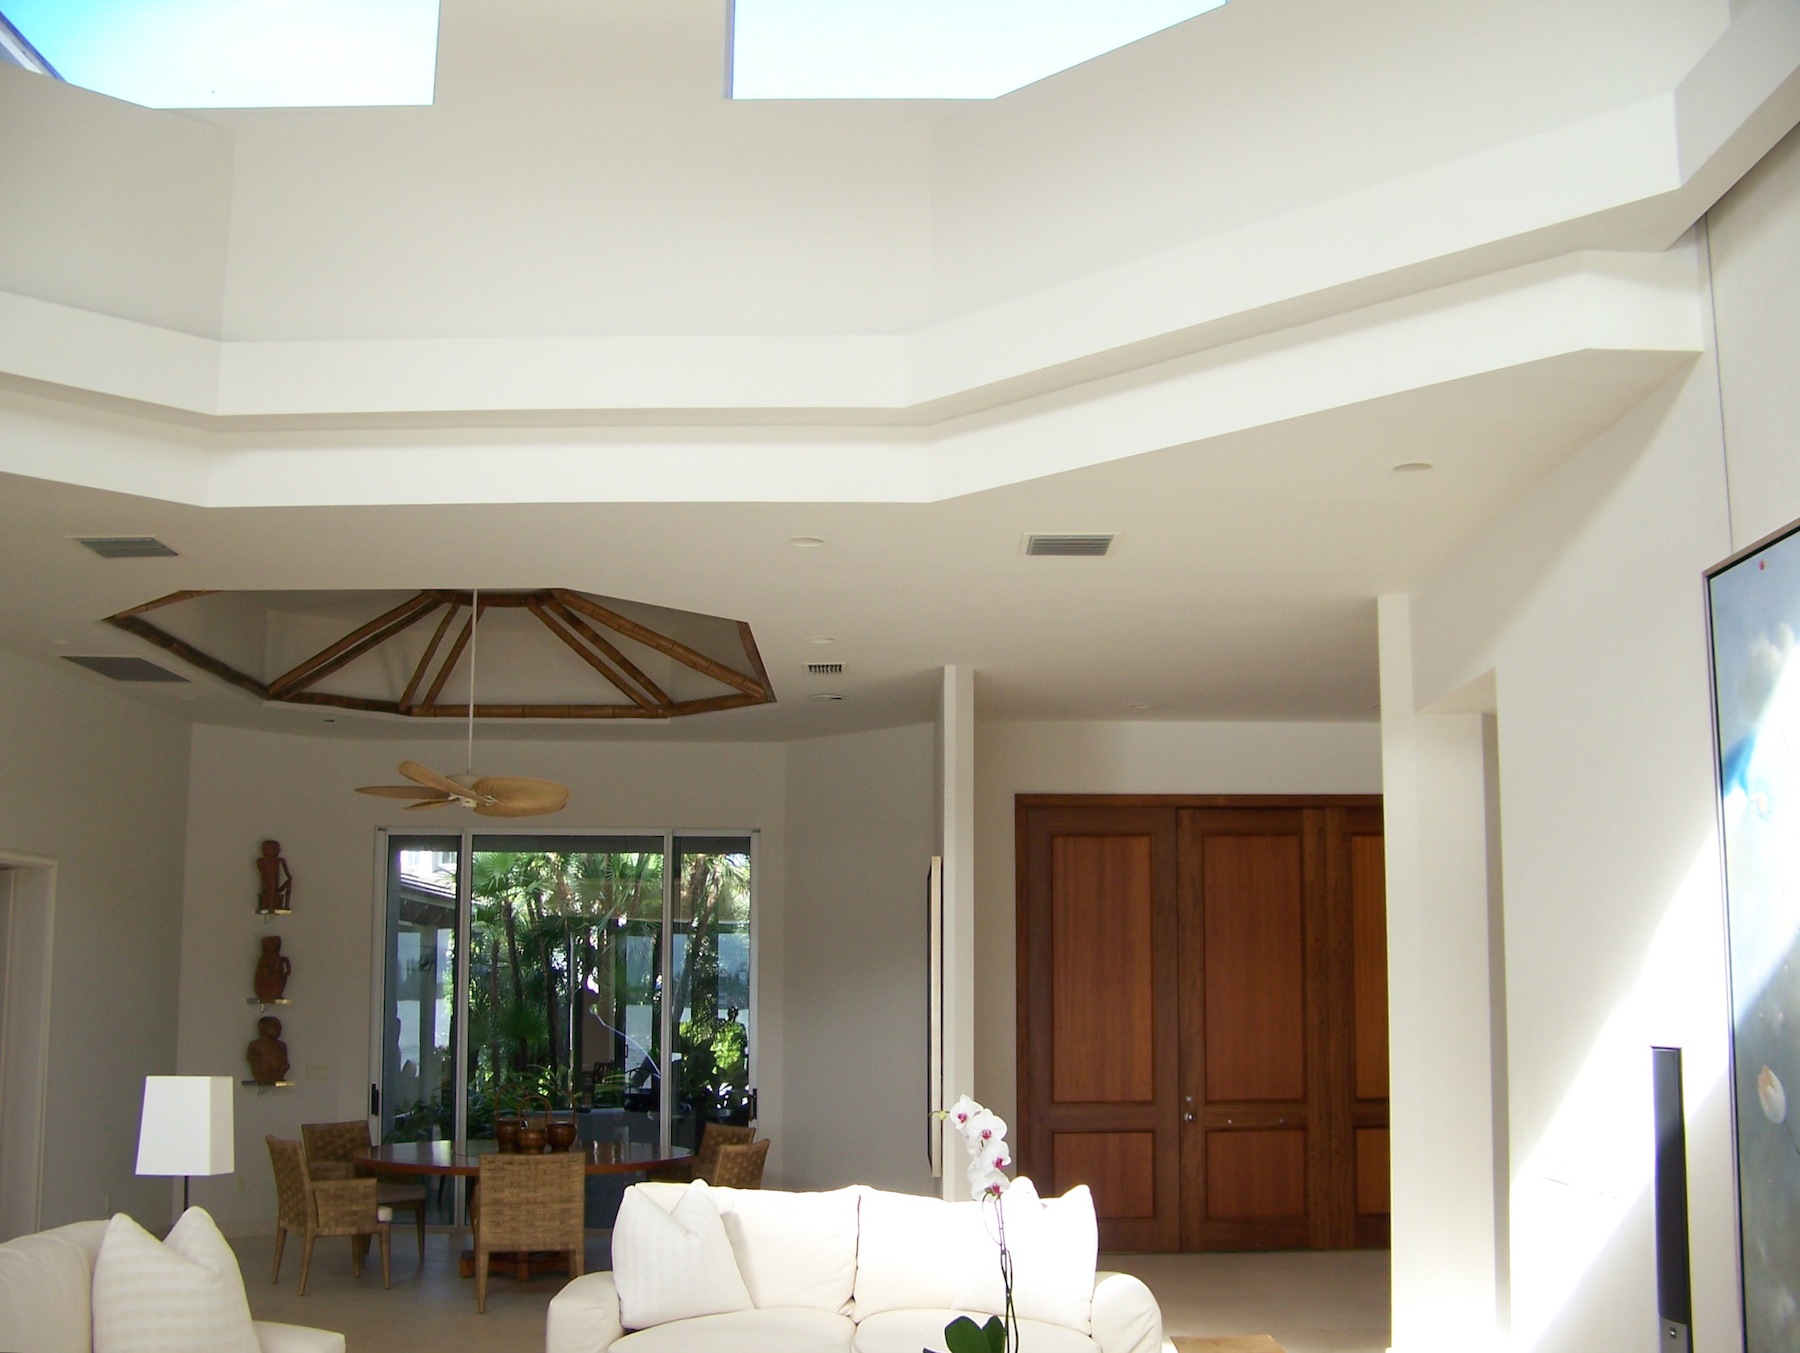 Entry system and bamboo ceiling - Hutchinson Island